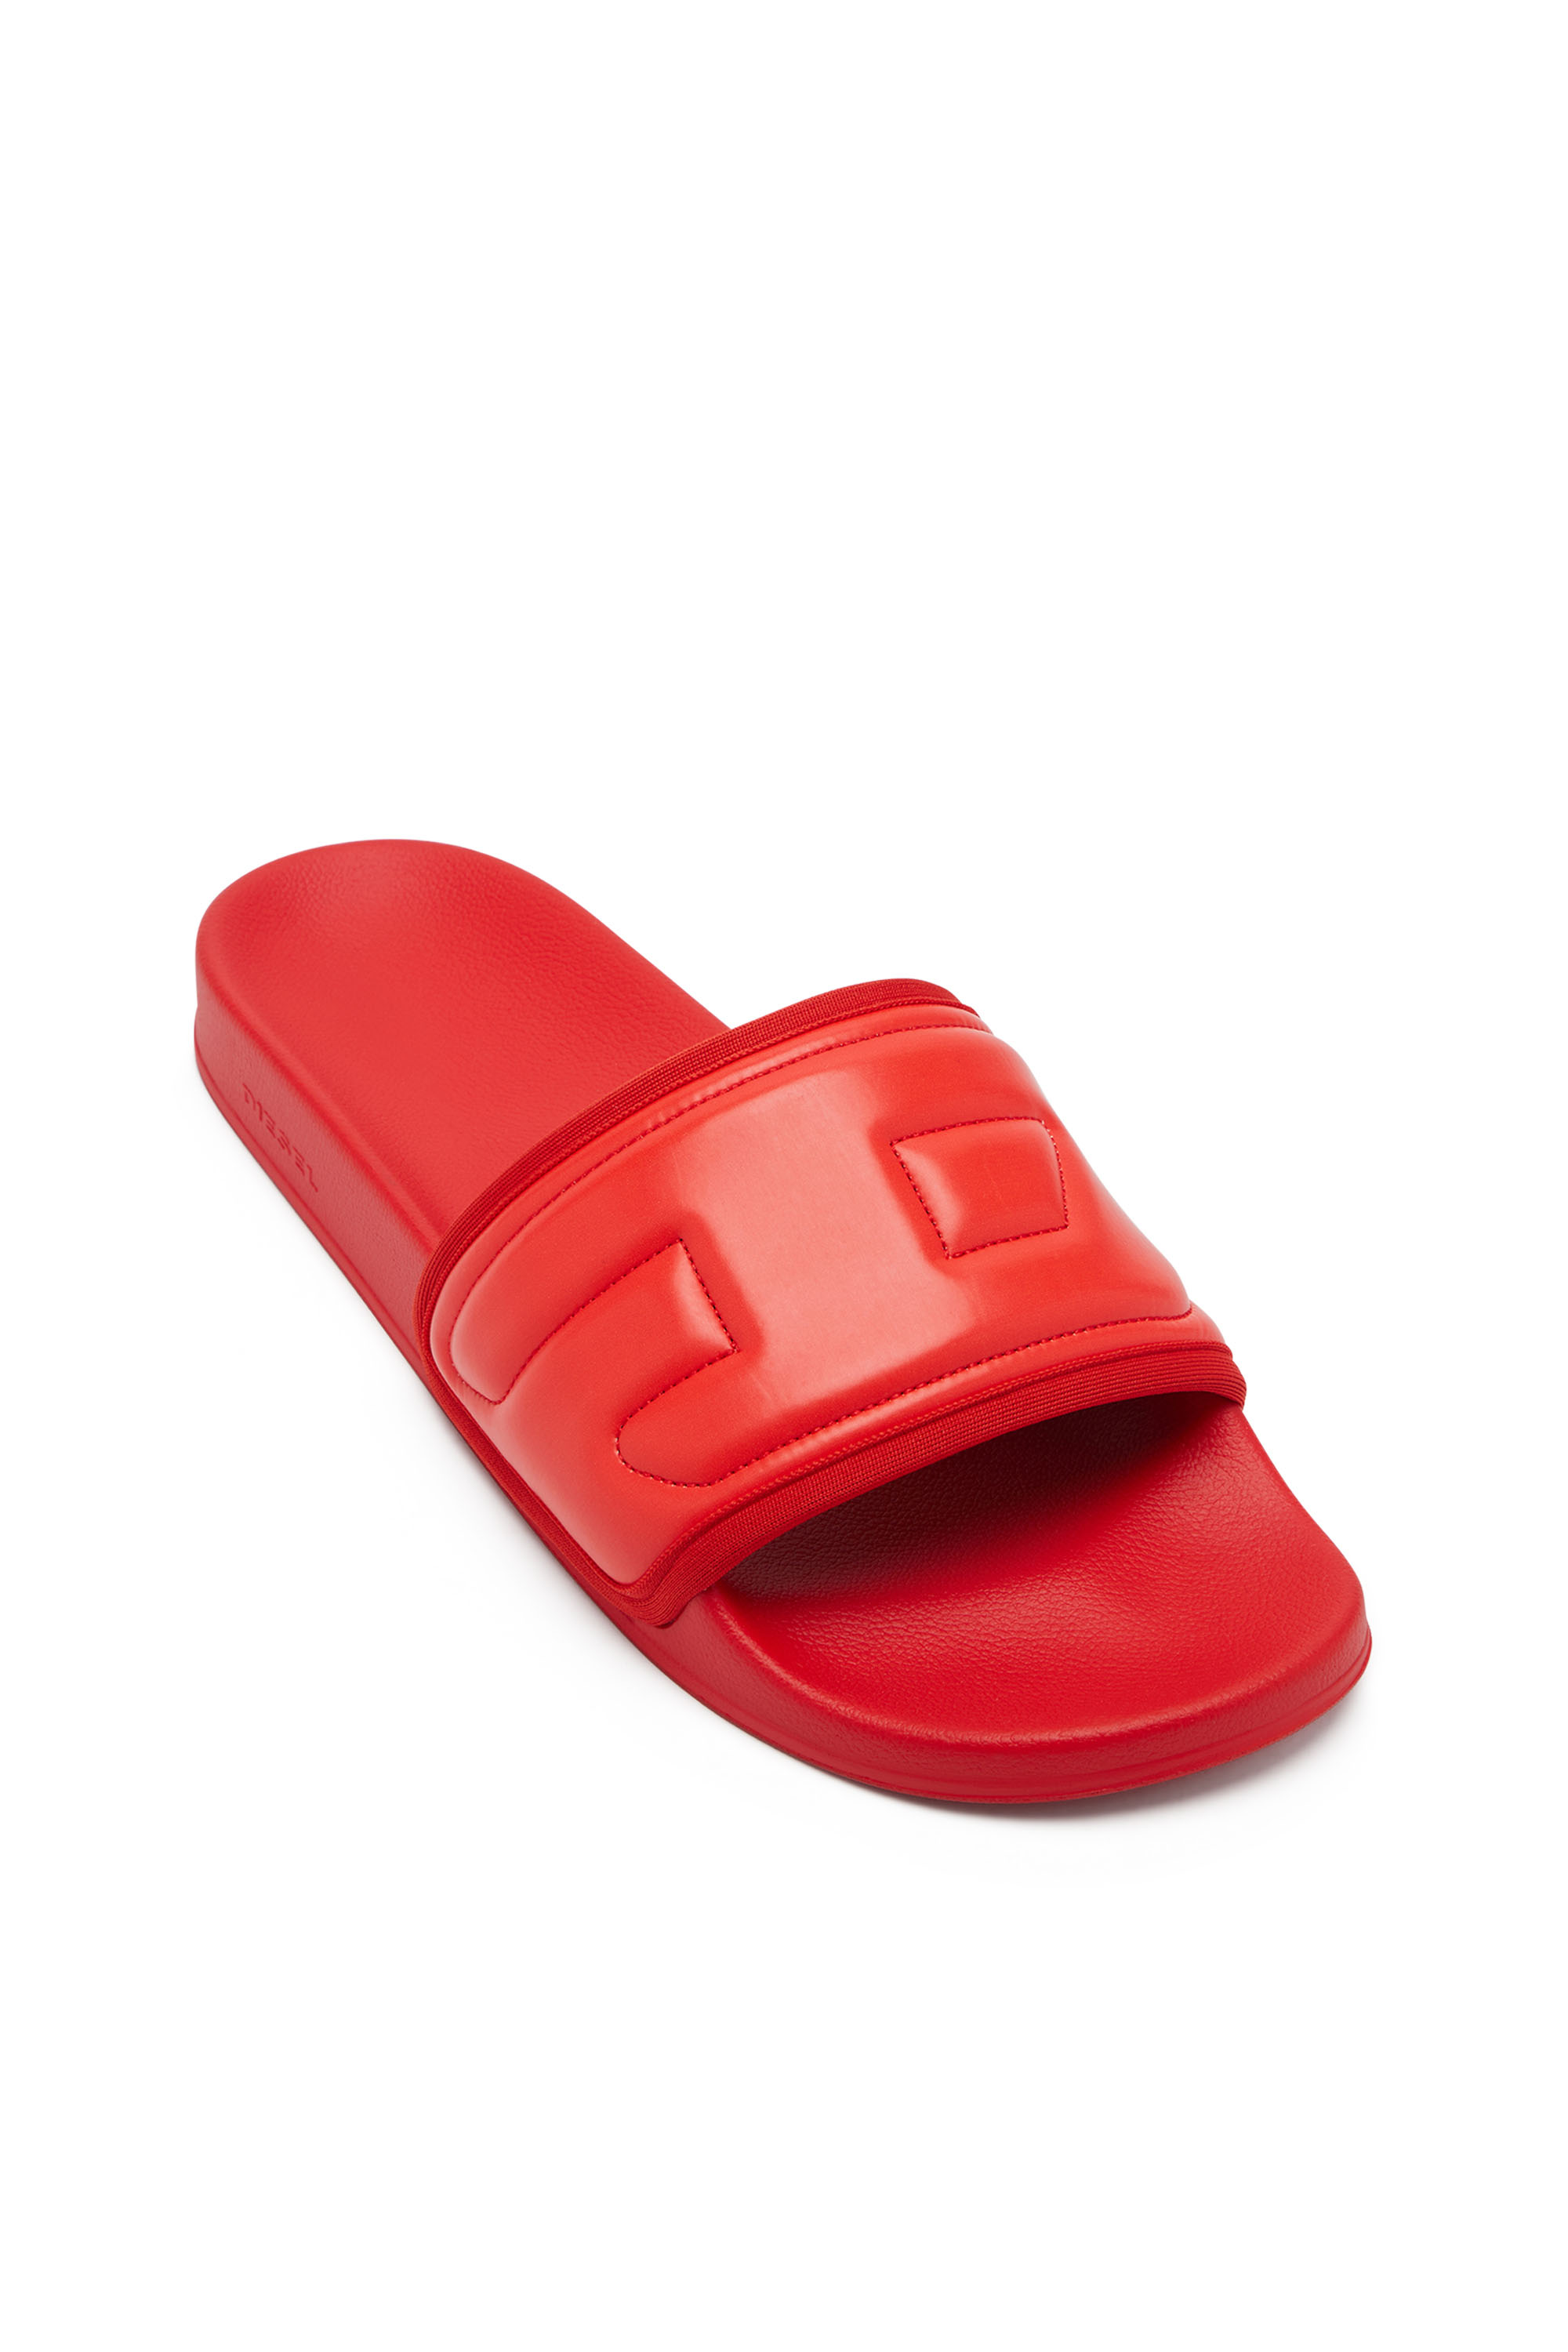 Diesel - SA-MAYEMI PUF X, Unisex Sa-Mayemi Puf X - Pool slides with puffy D logo in Red - Image 6